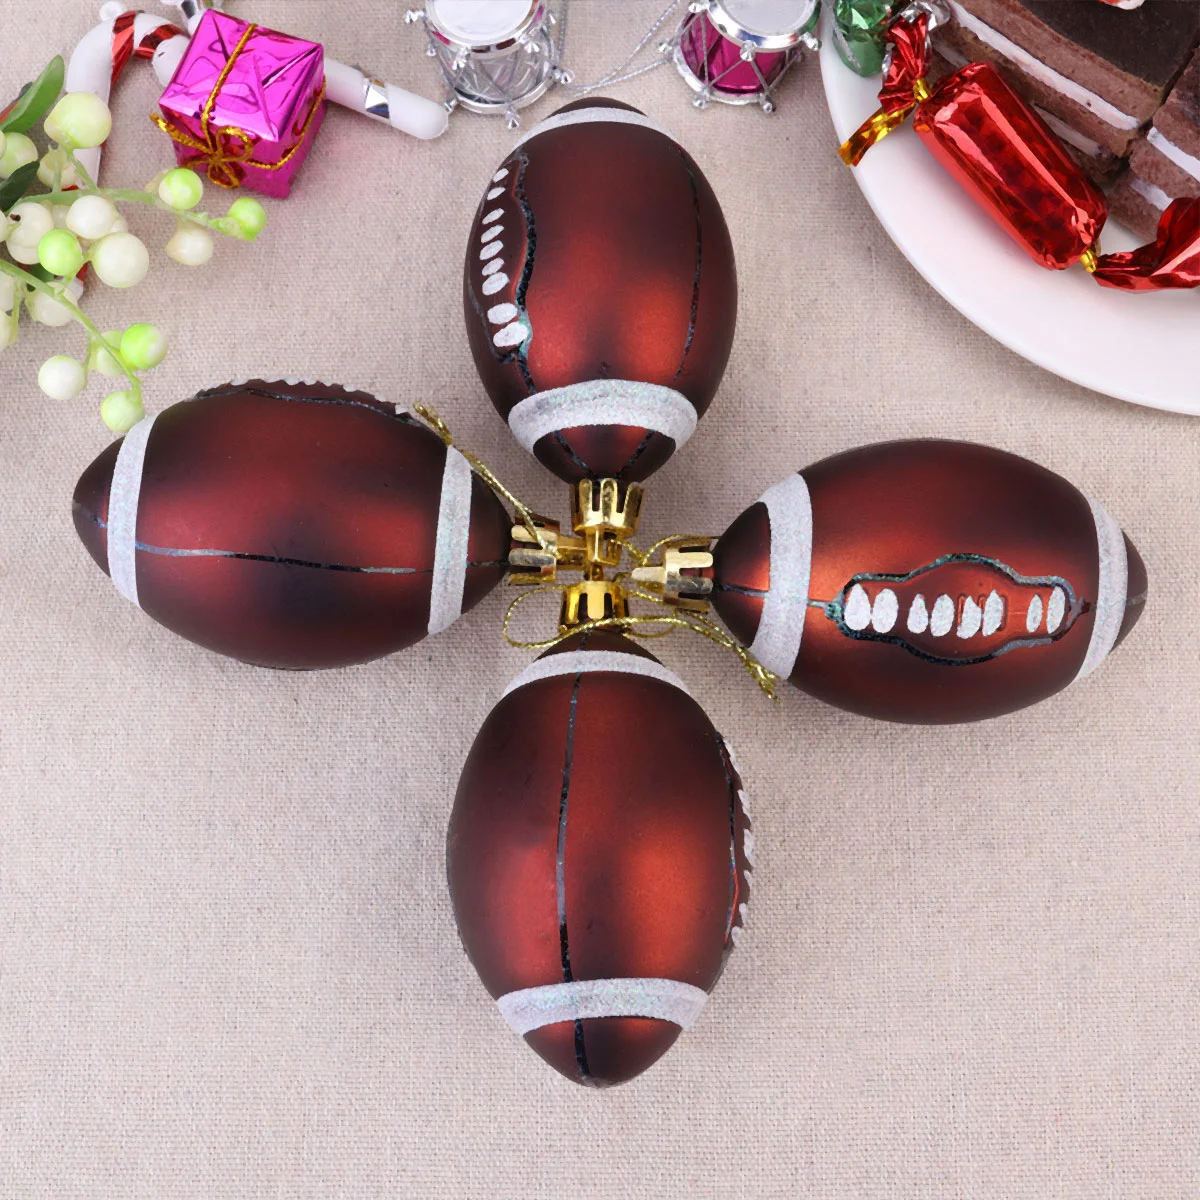 Christmas Tree Ornaments Hanging Basketball Decorations Ornament Sports Party Shatterproof Decoration Baubles Football Baseball 12 pieces box ornaments christmas tree hanging decorations wooden art festival atmosphere pendants tree and animal ornament